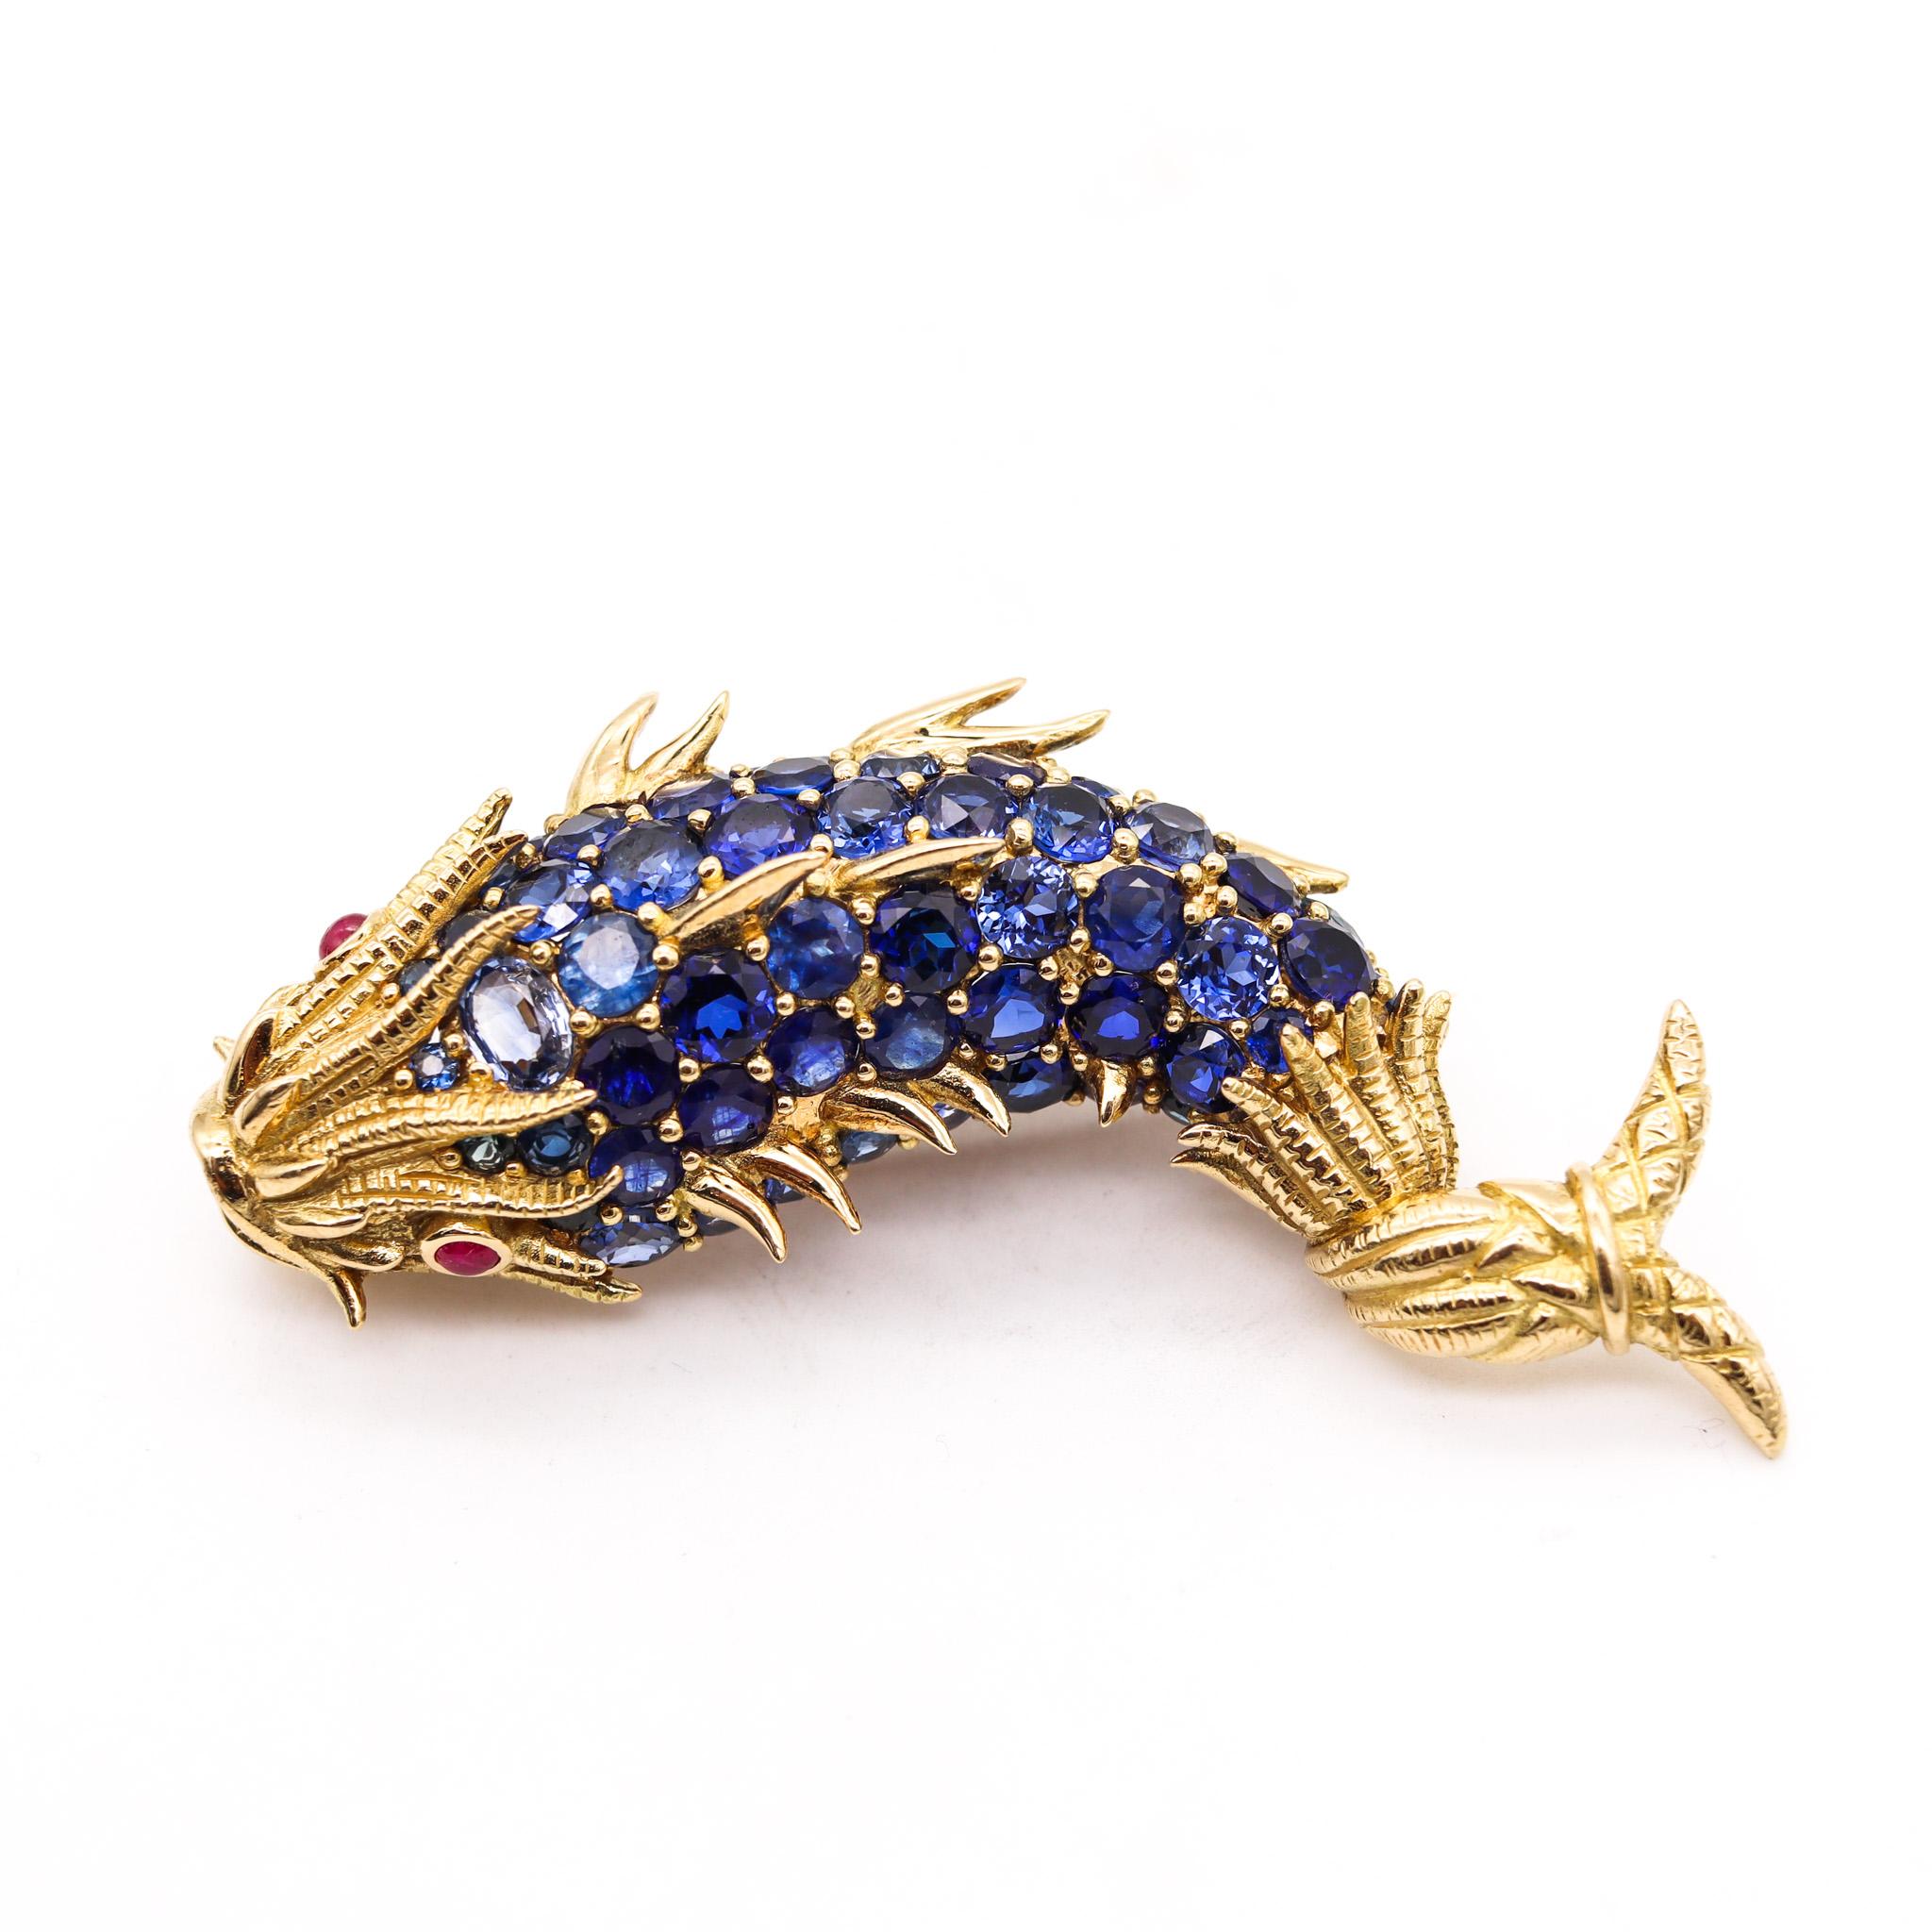 Tiffany & Co 1968 Mythological Fish Brooch in 18kt Gold with 60.05 Ctw Sapphires In Excellent Condition For Sale In Miami, FL